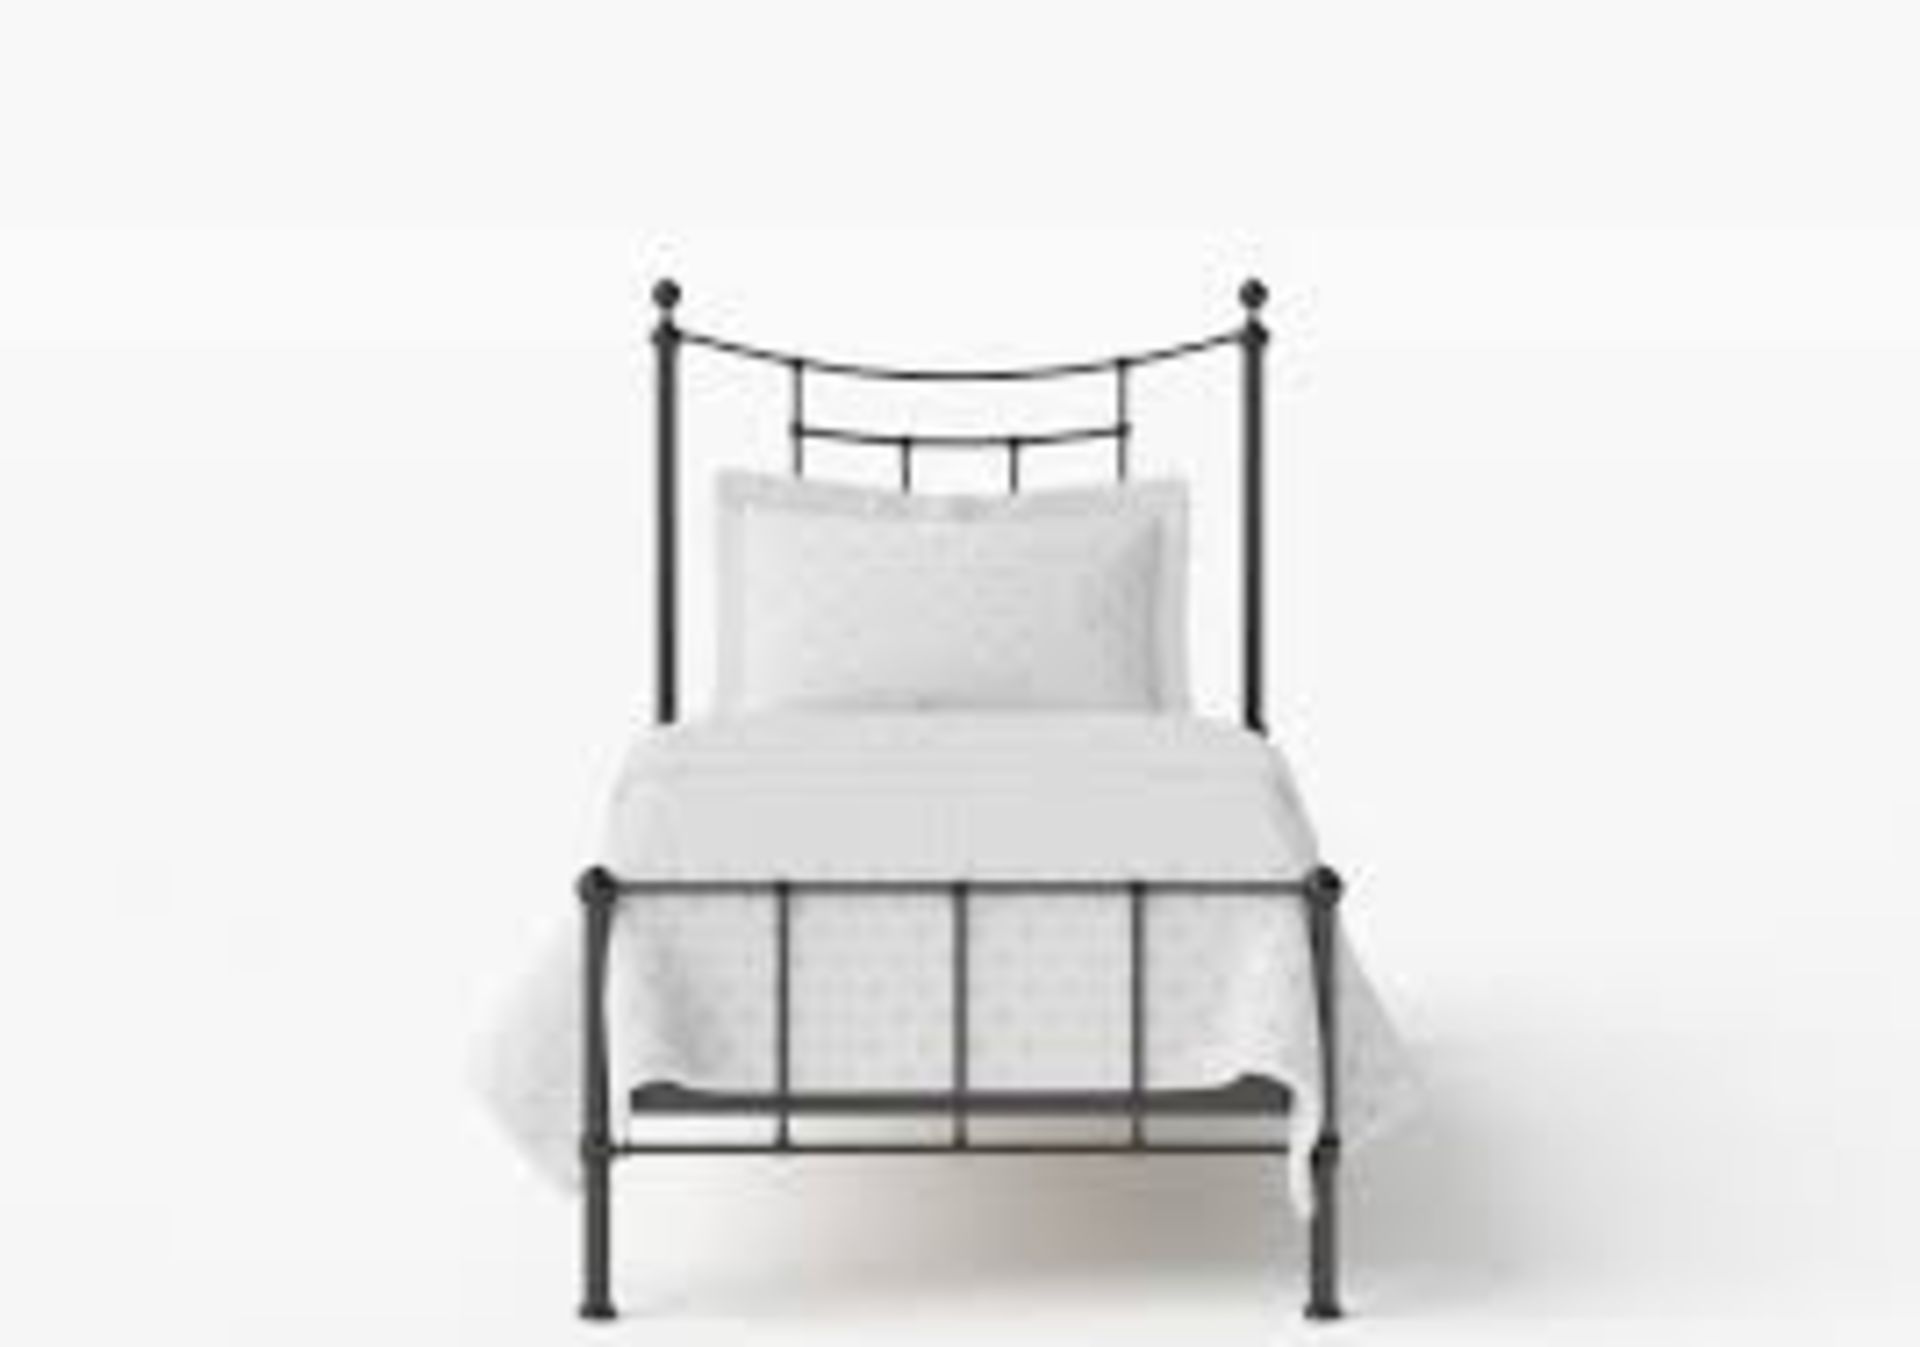 Boxed Isabel Single Bed In Black/White RRP £180 (Images Are For Illustrations Purposes Only And